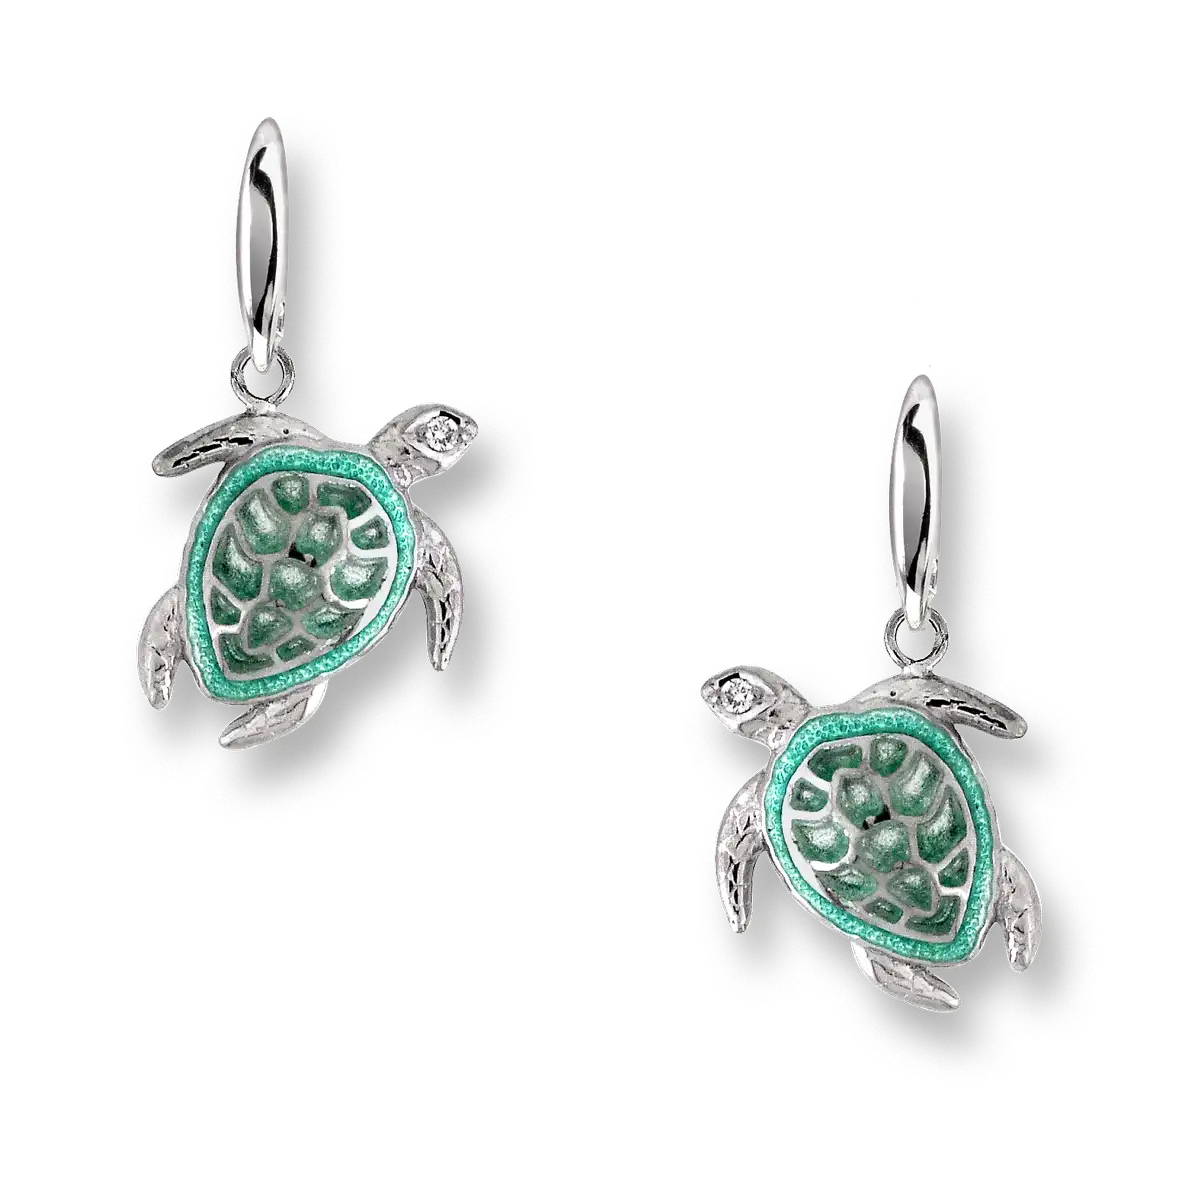 Green Plique-a-Jour Turtle Wire Earrings. Sterling Silver-White Sapphires